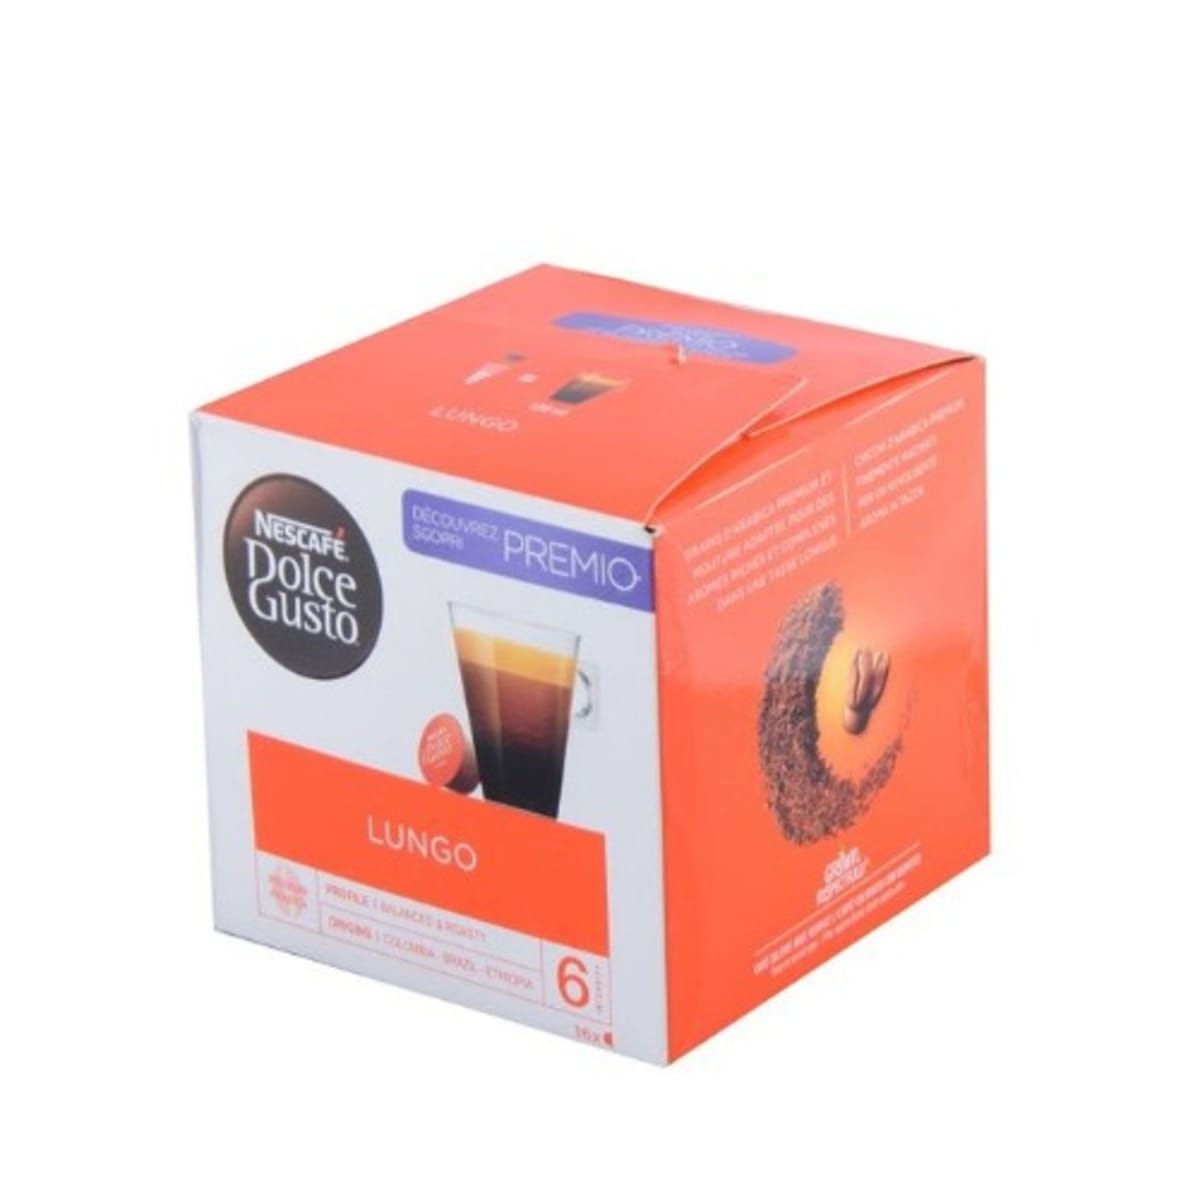 Dolce gusto coffee capsules – I love coffee